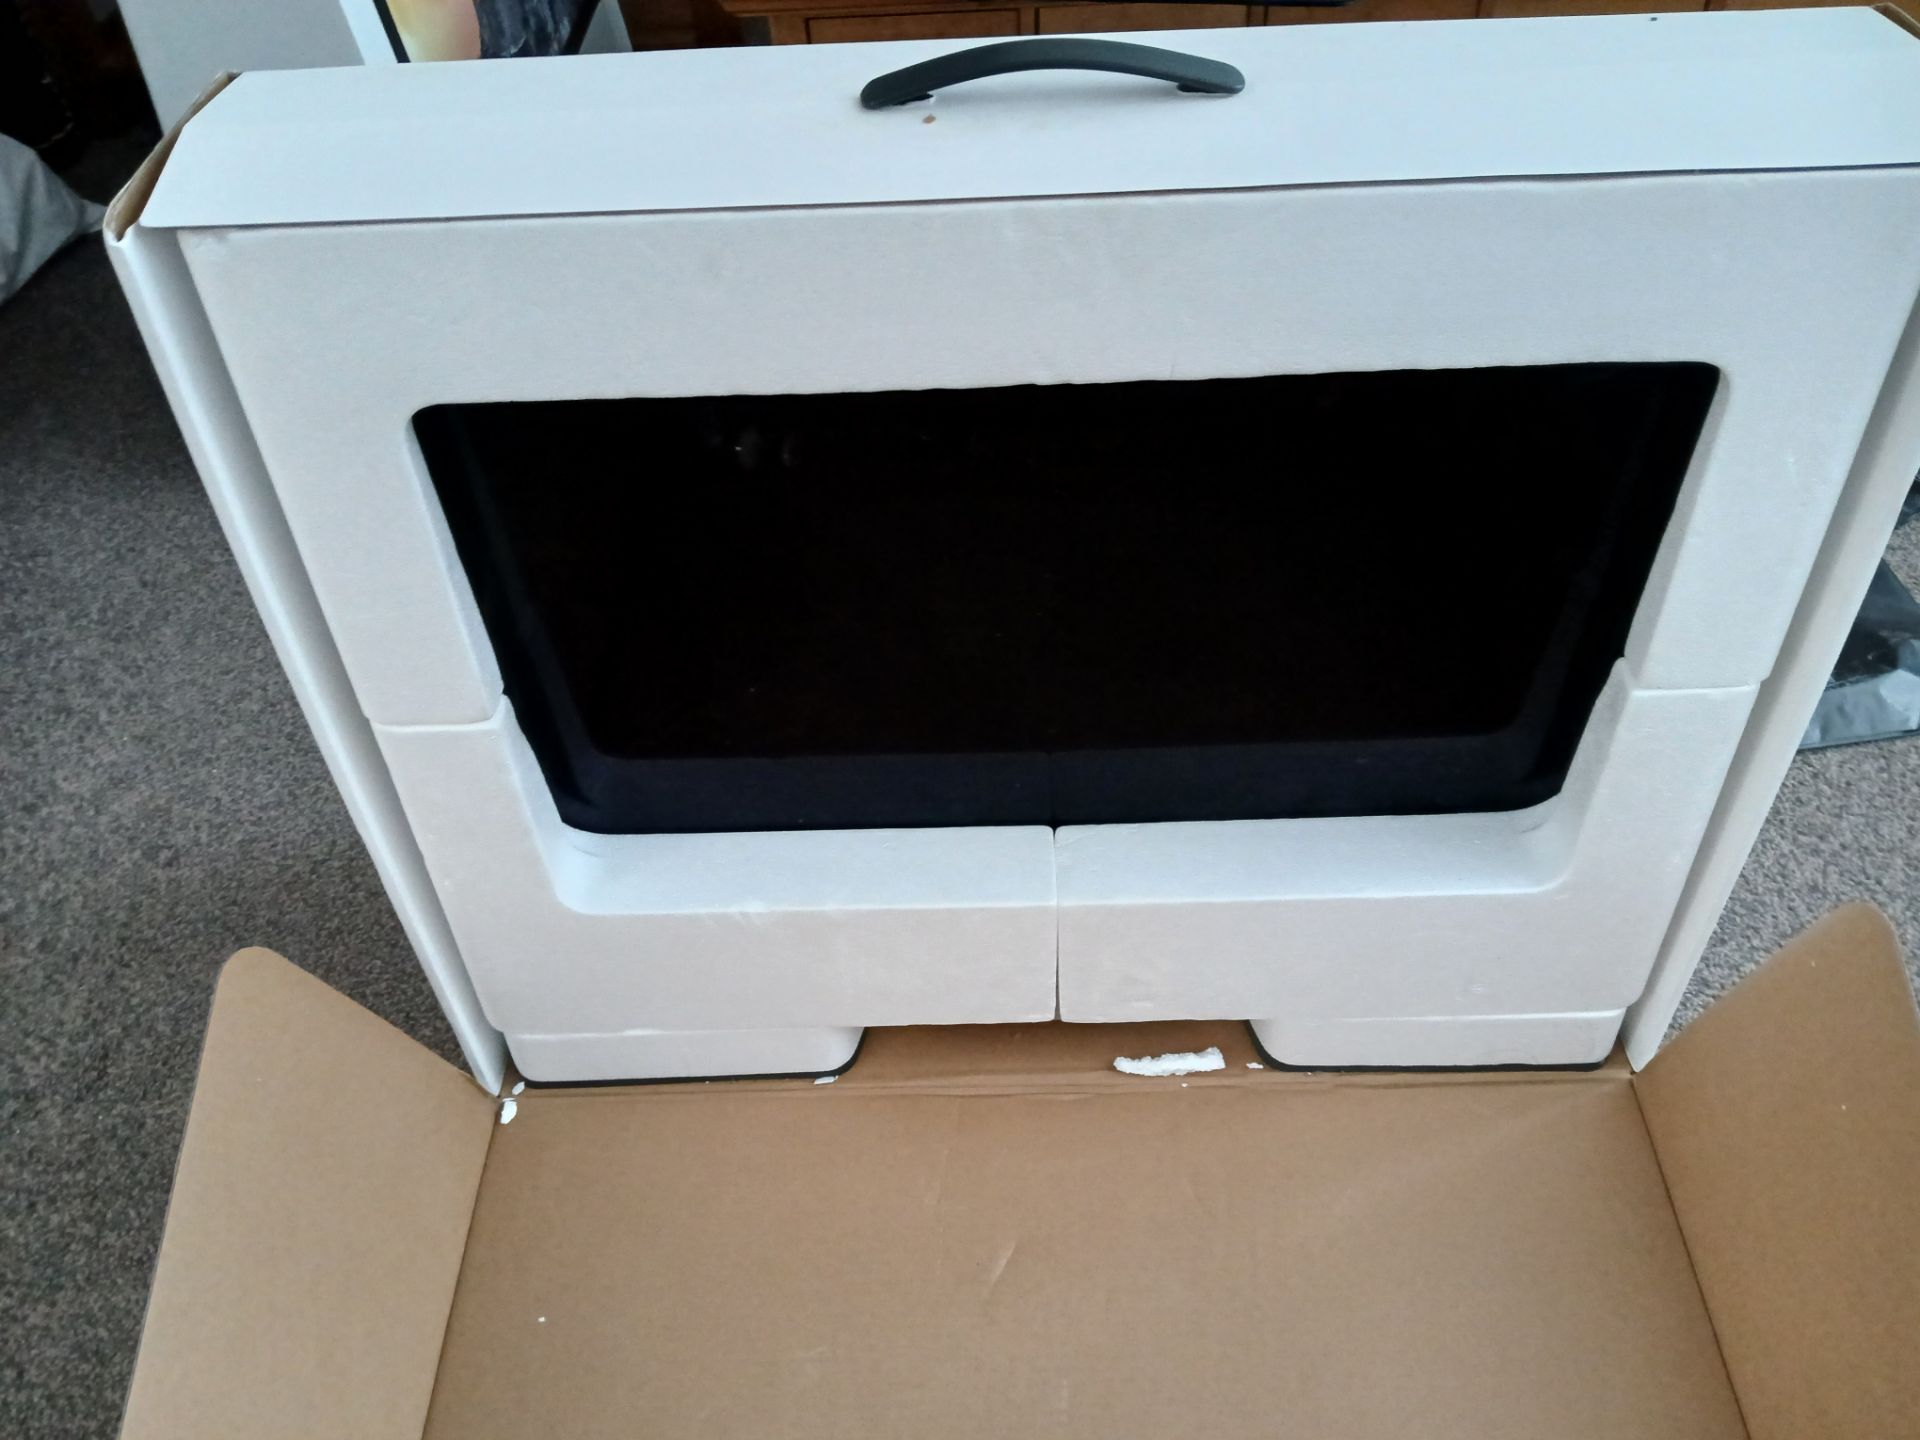 Apple iMac (Retina 5K, 27”, Mid 2015), Serial Number DGKQ306WFY13, with keyboard (No Mouse or - Image 9 of 14